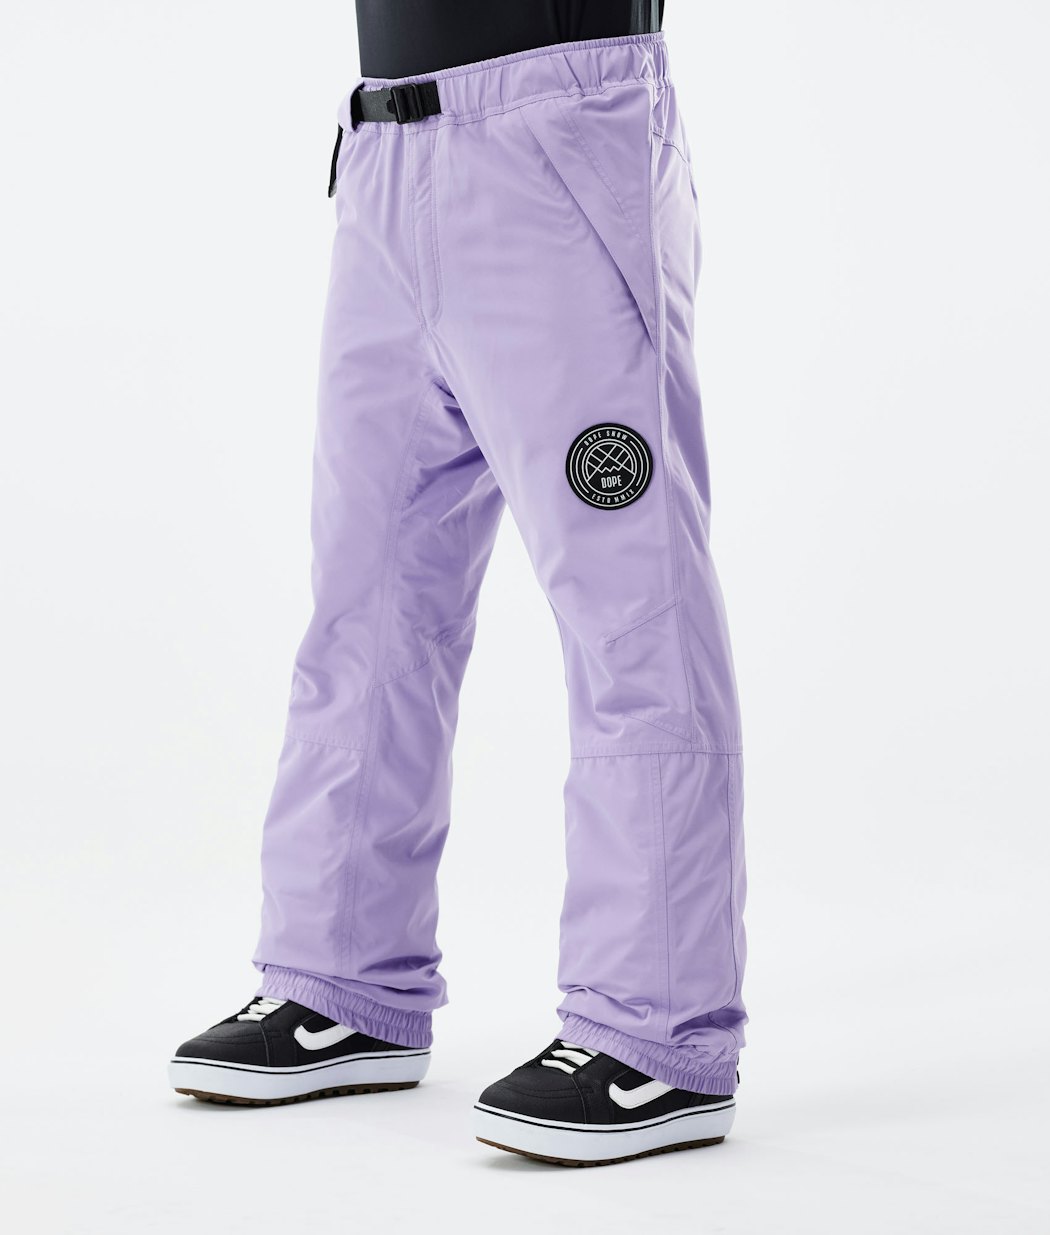 Dope Blizzard Snowboard Pants Faded Violet